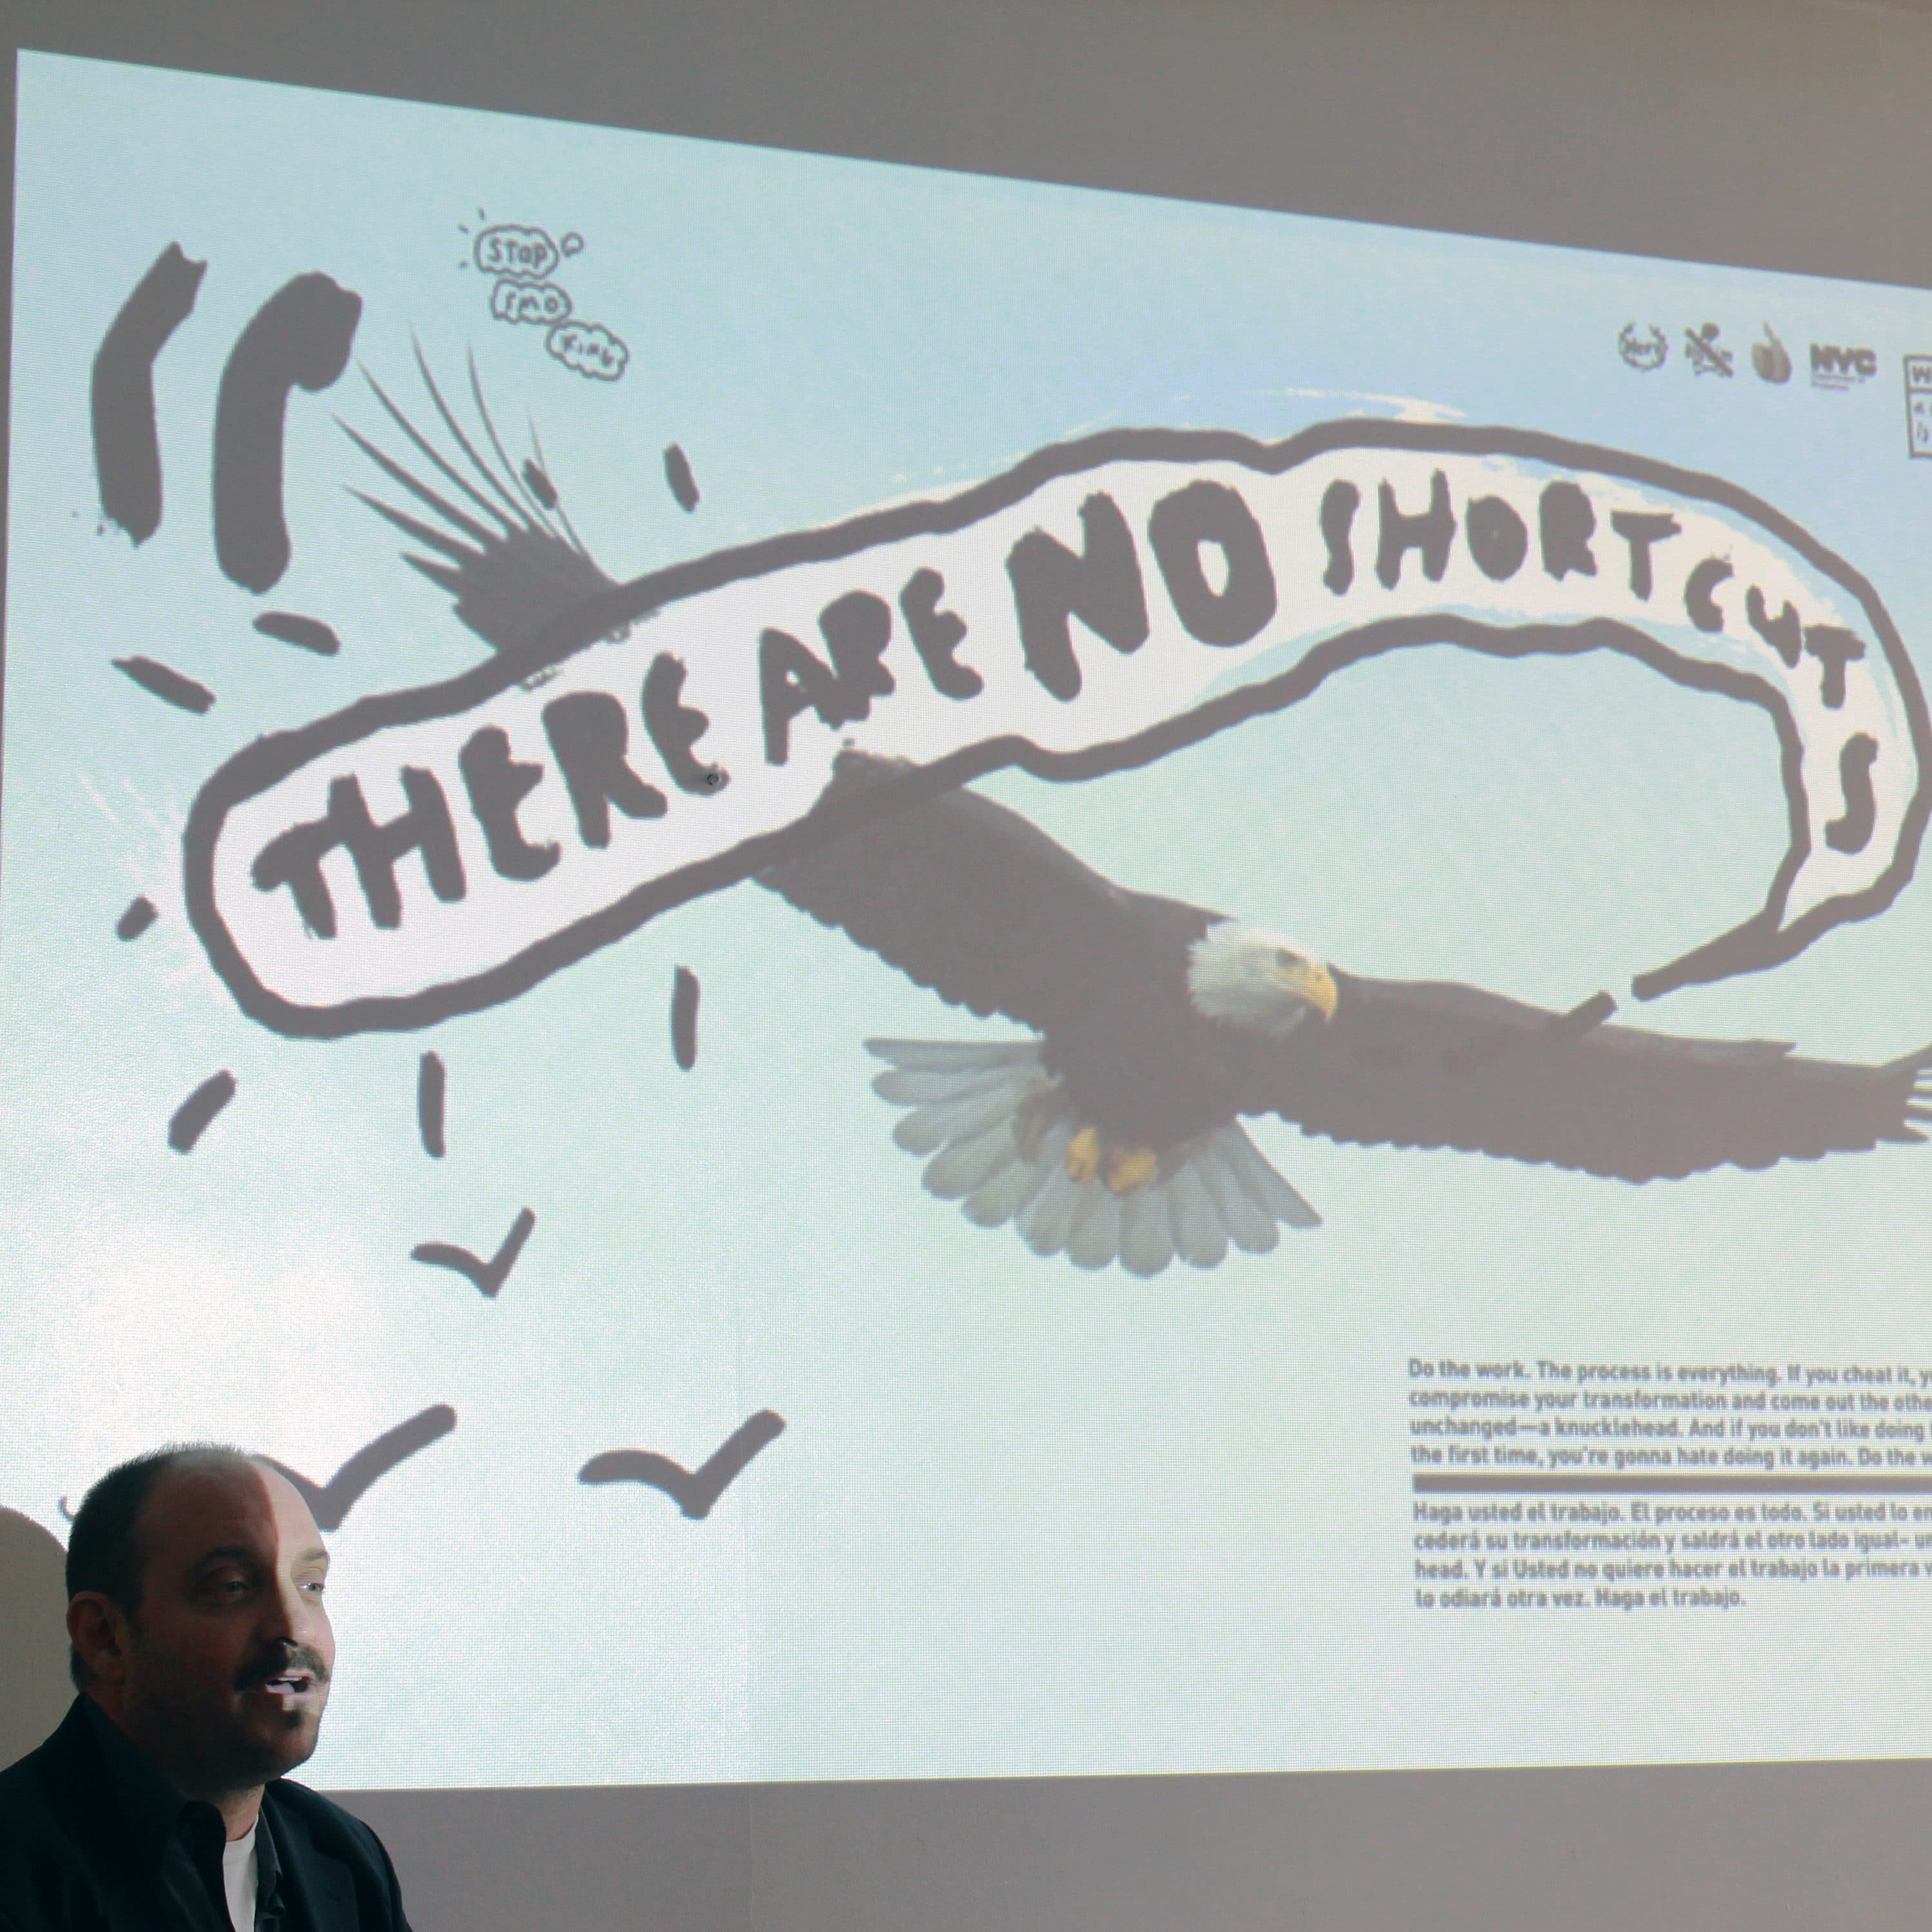 A man in a suit stands in front of a projection of an illustrated bald eagle flying with the text, "THERE ARE NO SHORTCUTS" in a speech bubble. Below, smaller text is visible but illegible from this distance. The background is a plain white wall.